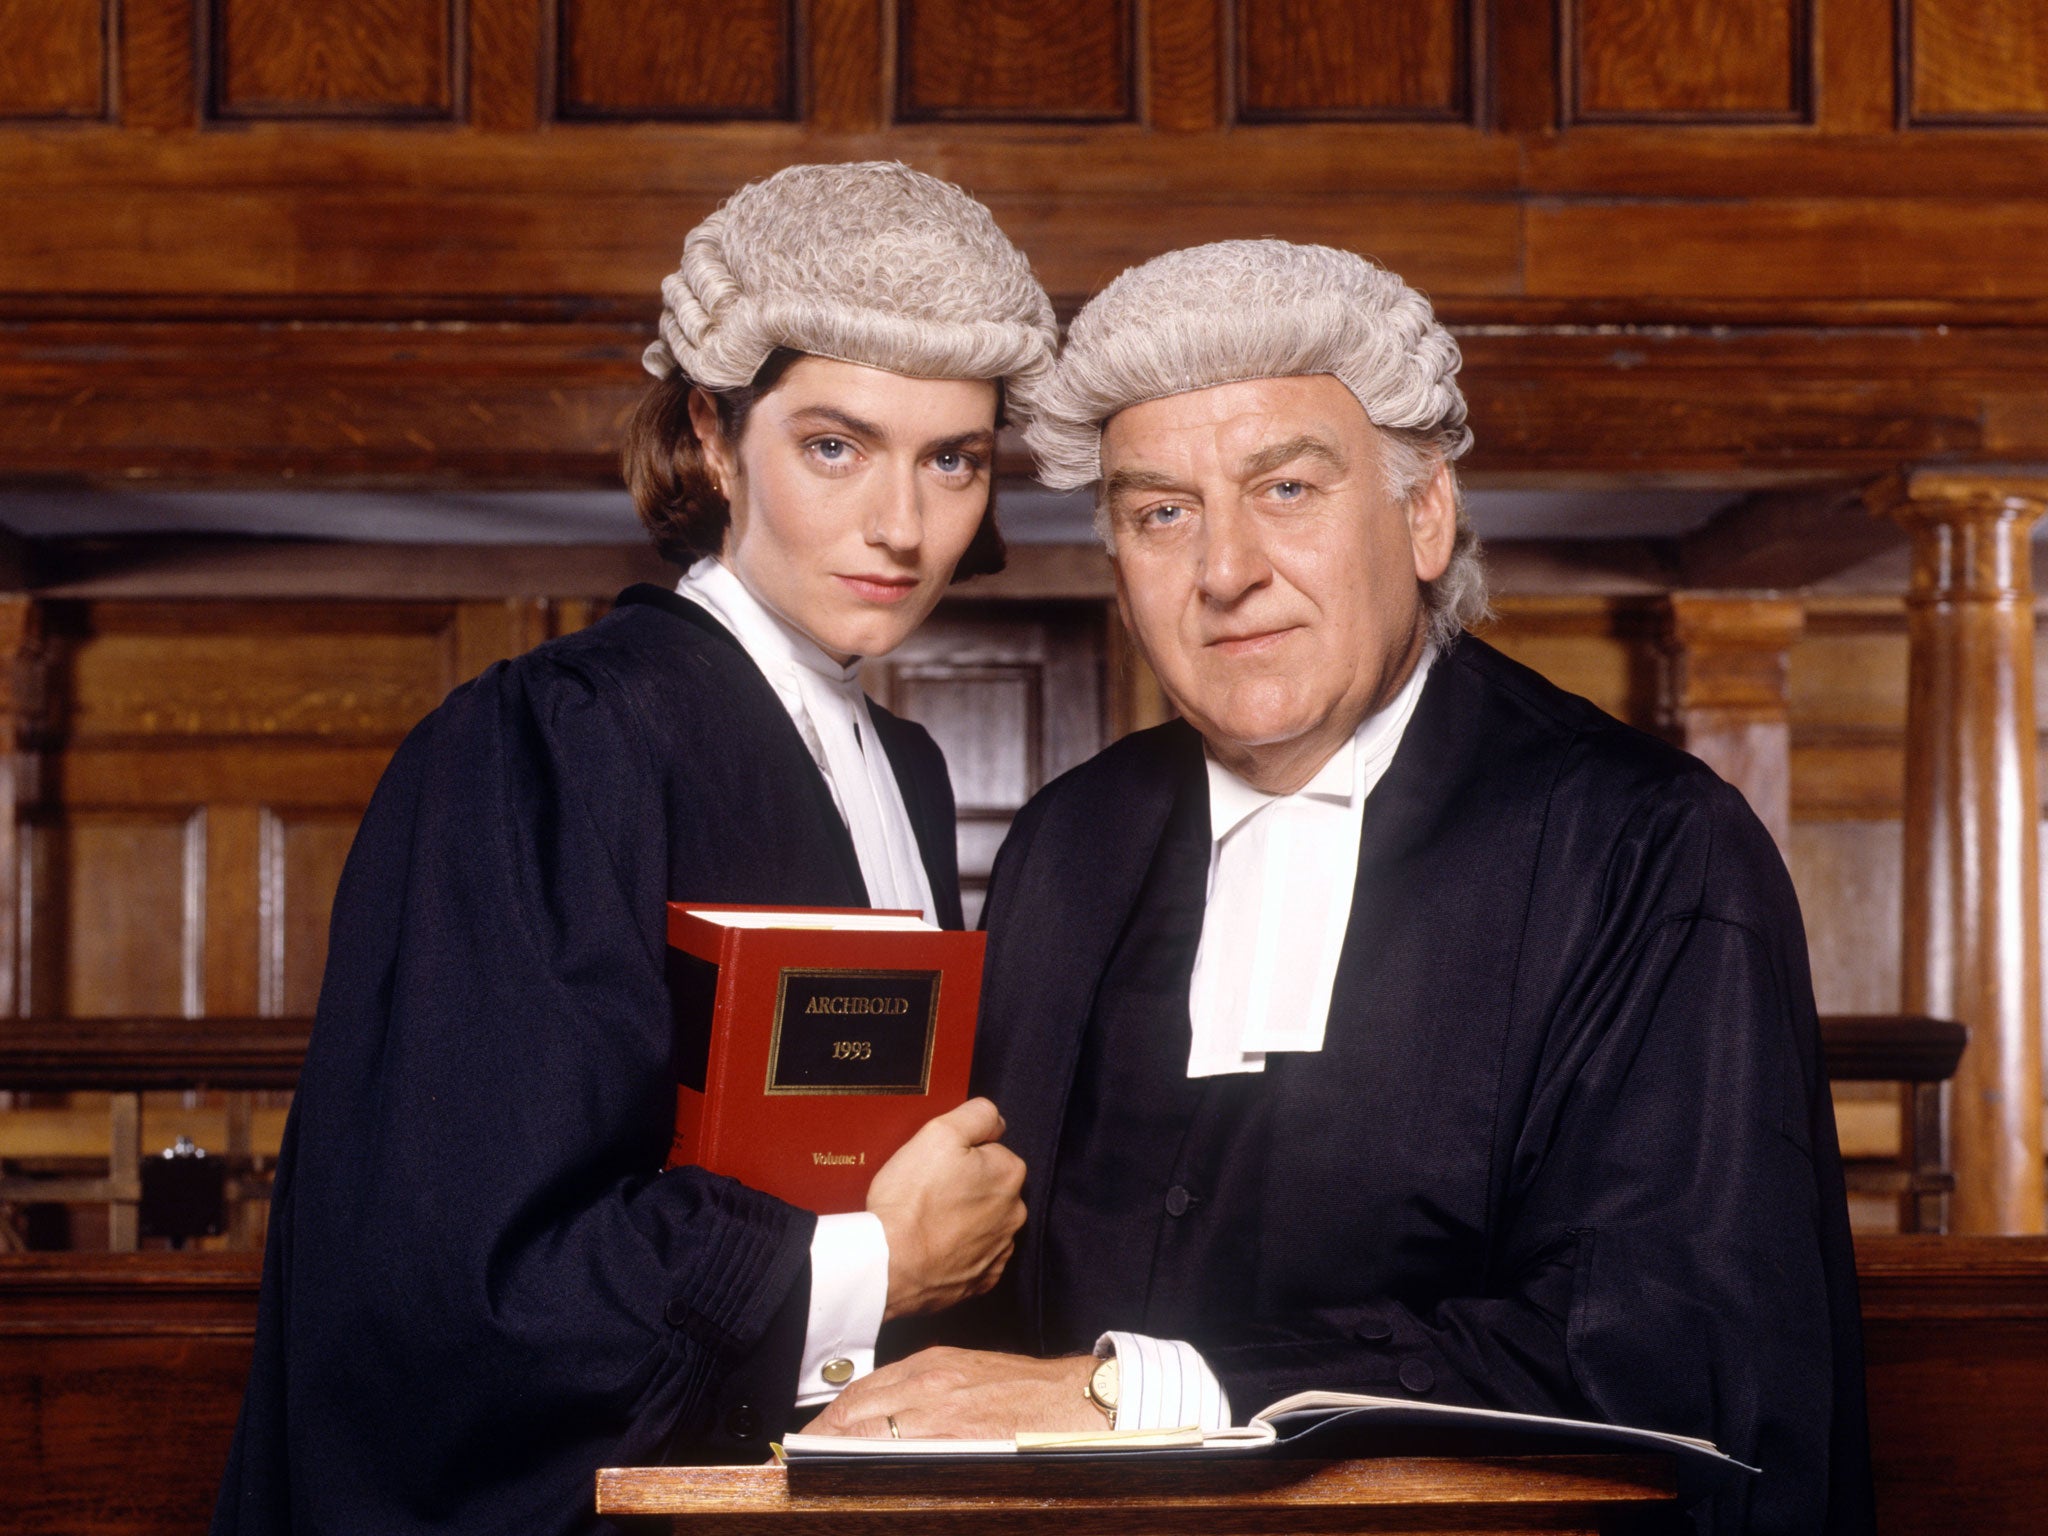 Chancellor starred opposite John Thaw in hit show Kavanagh QC in 1997